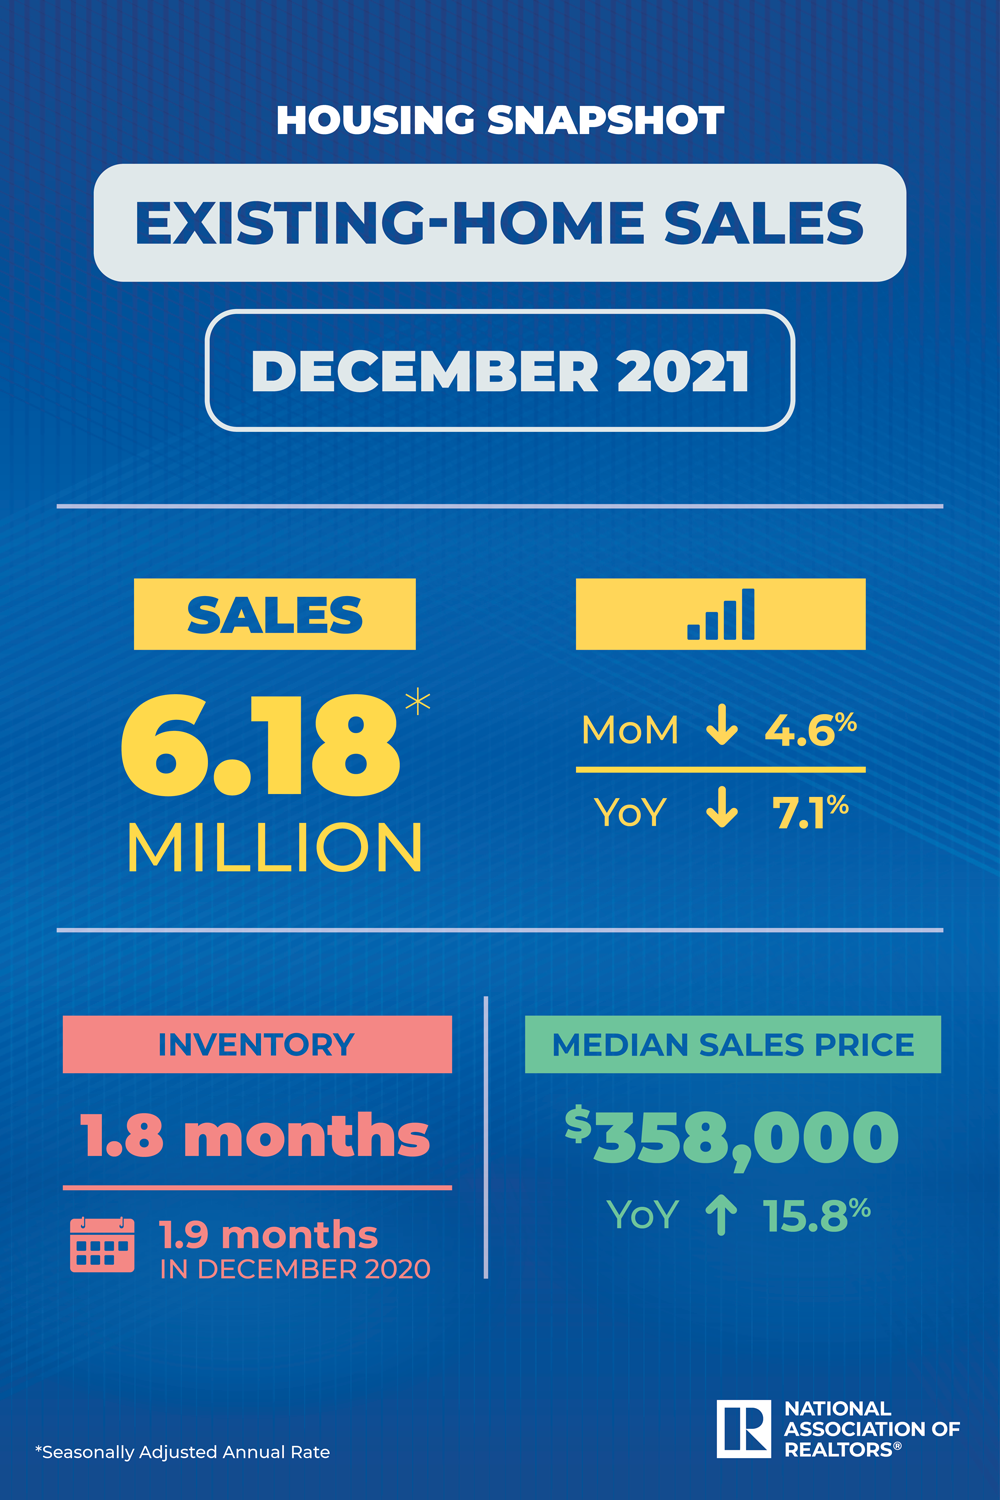 A chart showing existing-home sales for the month of December 2021.